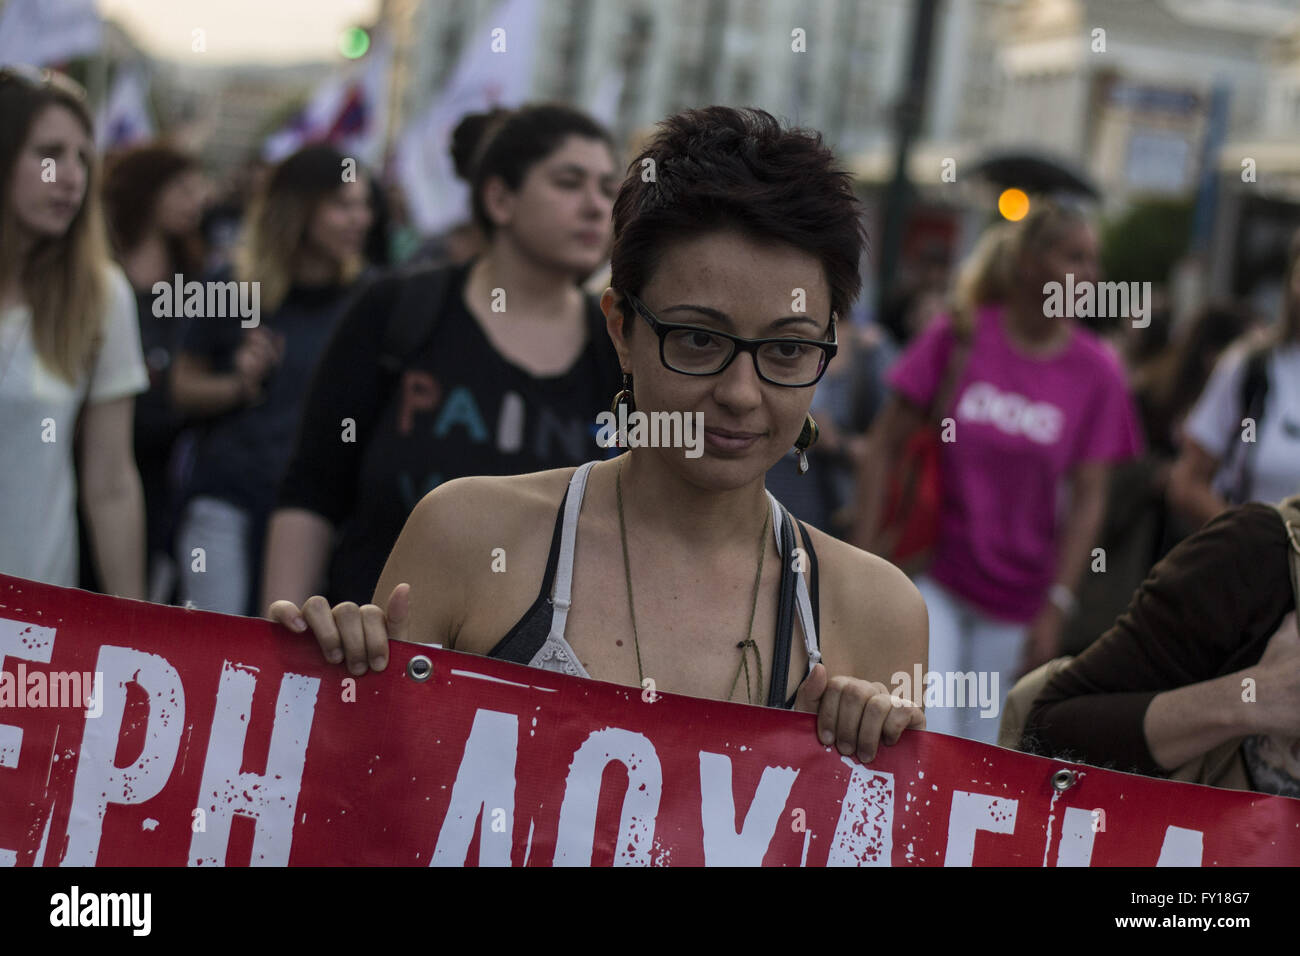 Athens, Greece. 19th Apr, 2016. Standby teachers in public education march shouting slogans against the government and the reforms it is about to pass, which as the claim, will bring layoffs. © Nikolas Georgiou/ZUMA Wire/Alamy Live News Stock Photo